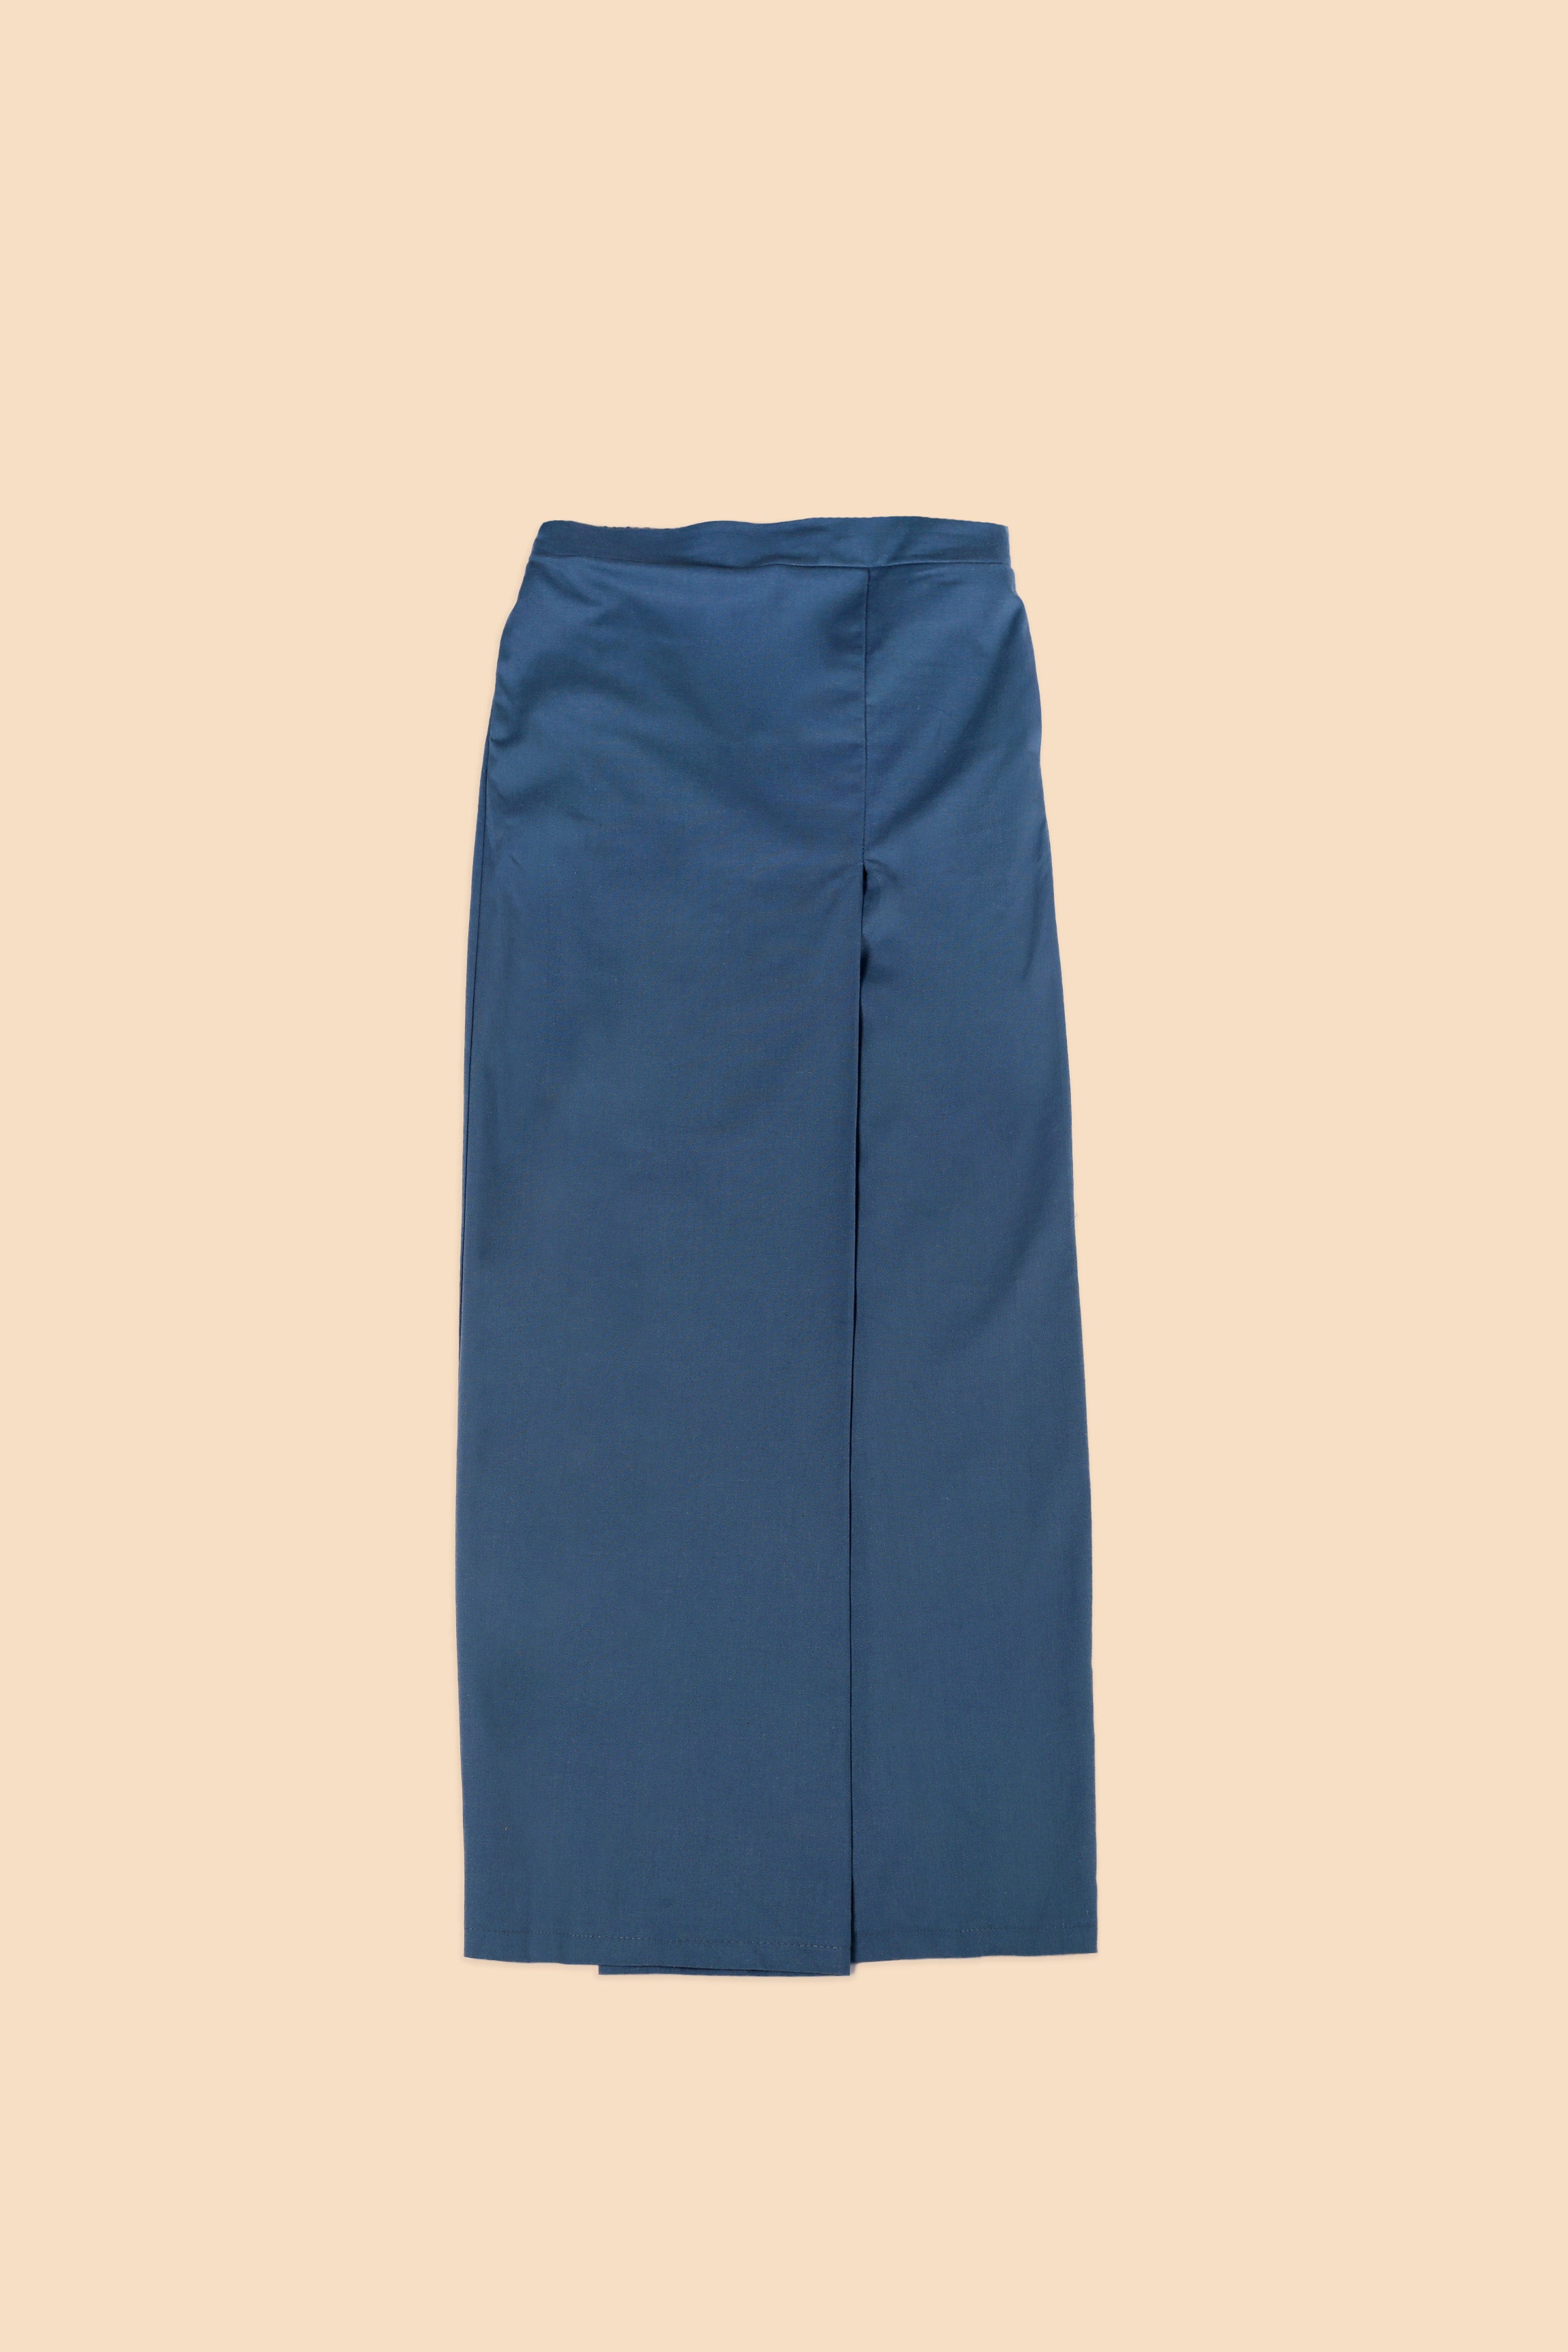 The Coral Women Classic Skirt Steel Blue